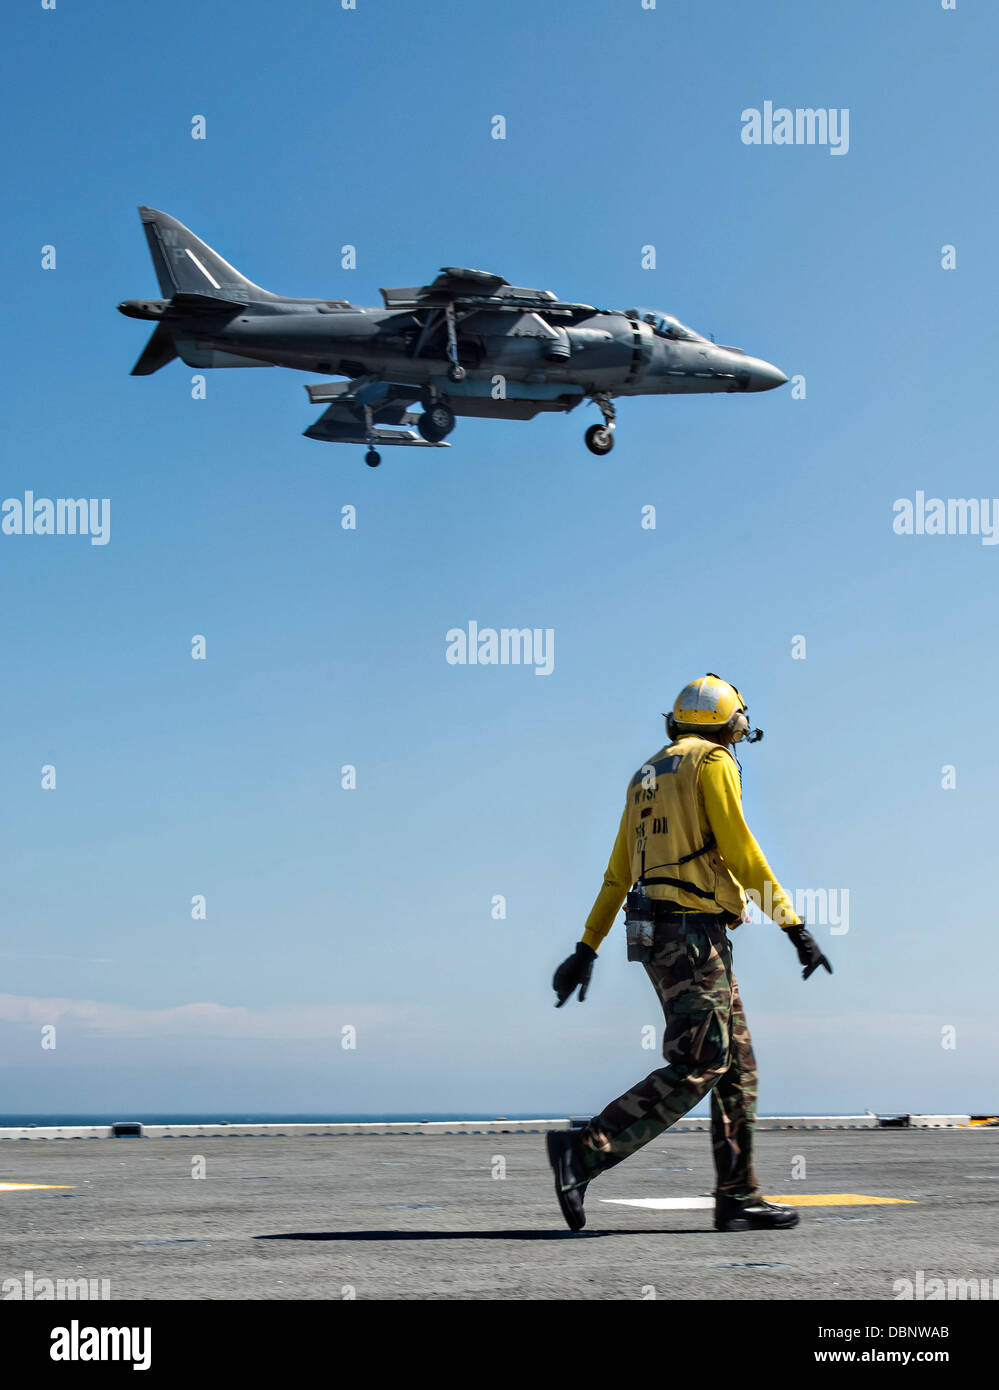 A US Navy Aviation Boatswain Mate watches a AV-8B II Harrier fighter jet land on the flight deck of the amphibious assault ship USS Wasp July 23, 2013 operating in the Atlantic Ocean. Stock Photo